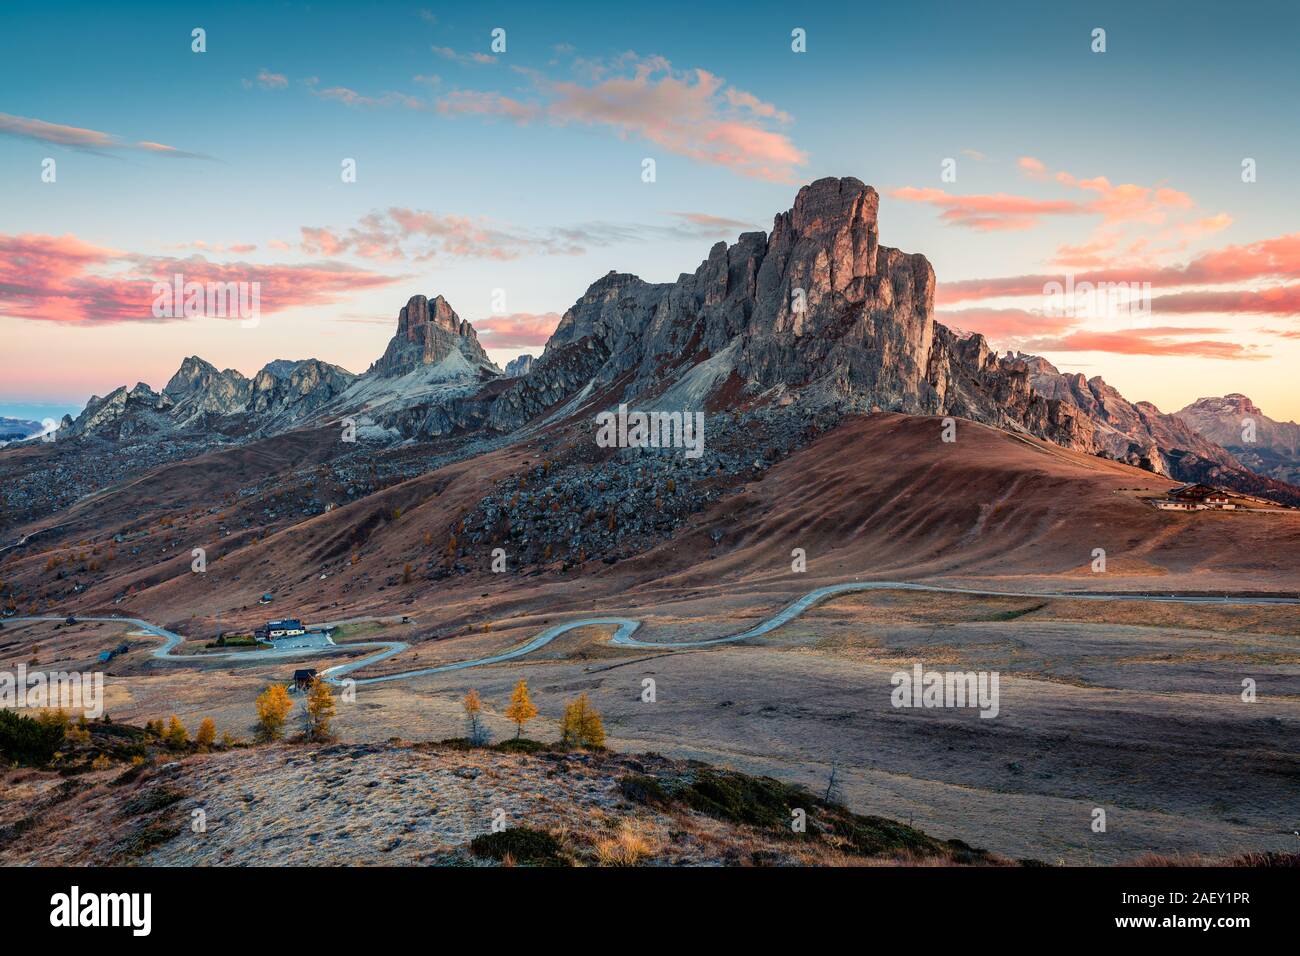 Fantastic morning view from the top of Giau pass with famous Ra Gusela, Nuvolau peaks in background. Colorful autumn sunrise in Dolomite Alps, Italy. Stock Photo